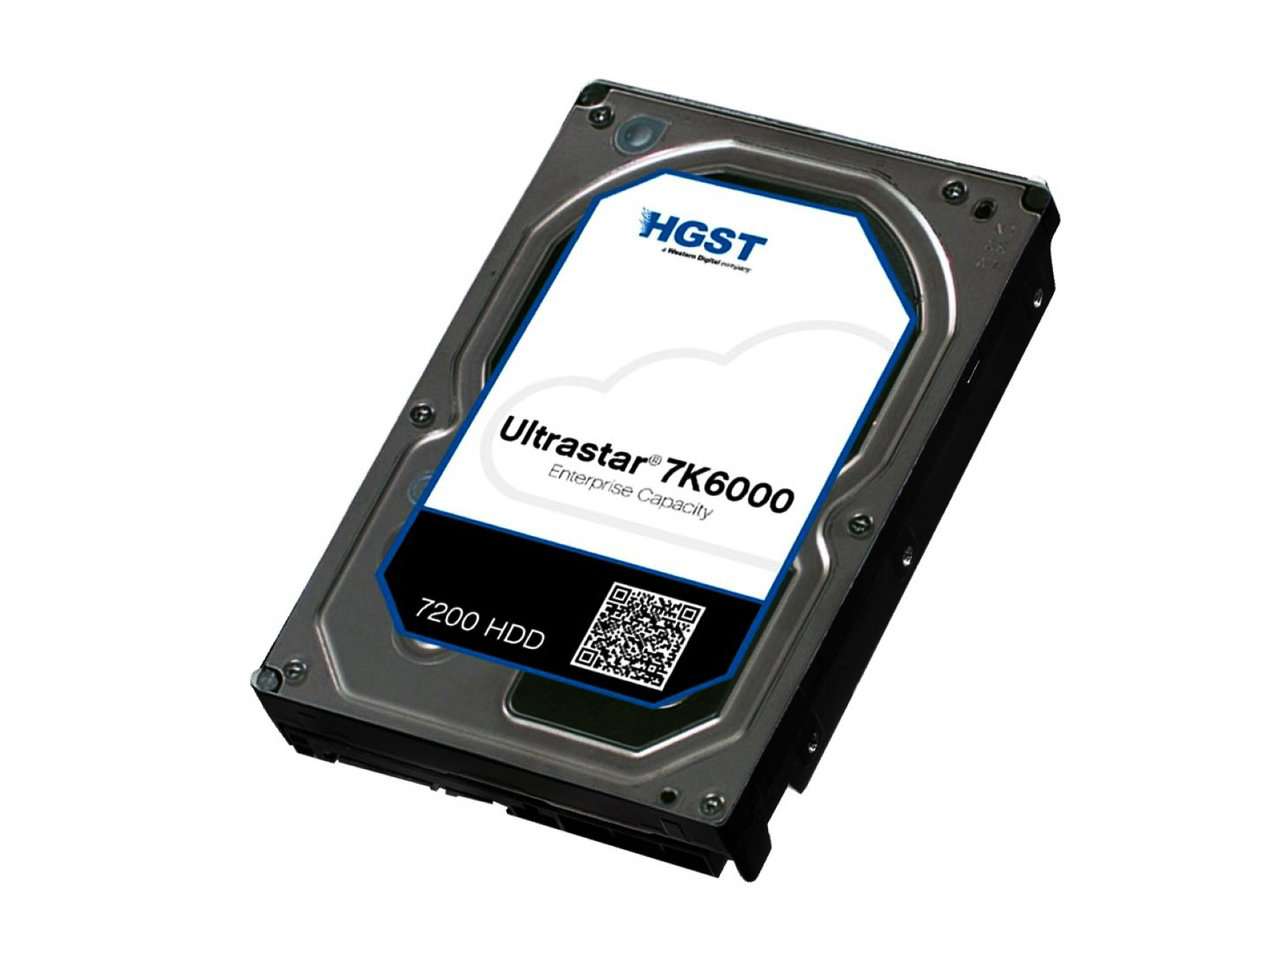 HGST Ultrastar 7K6000 0F22821  HUS726060AL5215 6TB 7.2K RPM SAS 12Gb/s 512e 128MB Cache 3.5" TCG FIPS Manufacturer Recertified HDD